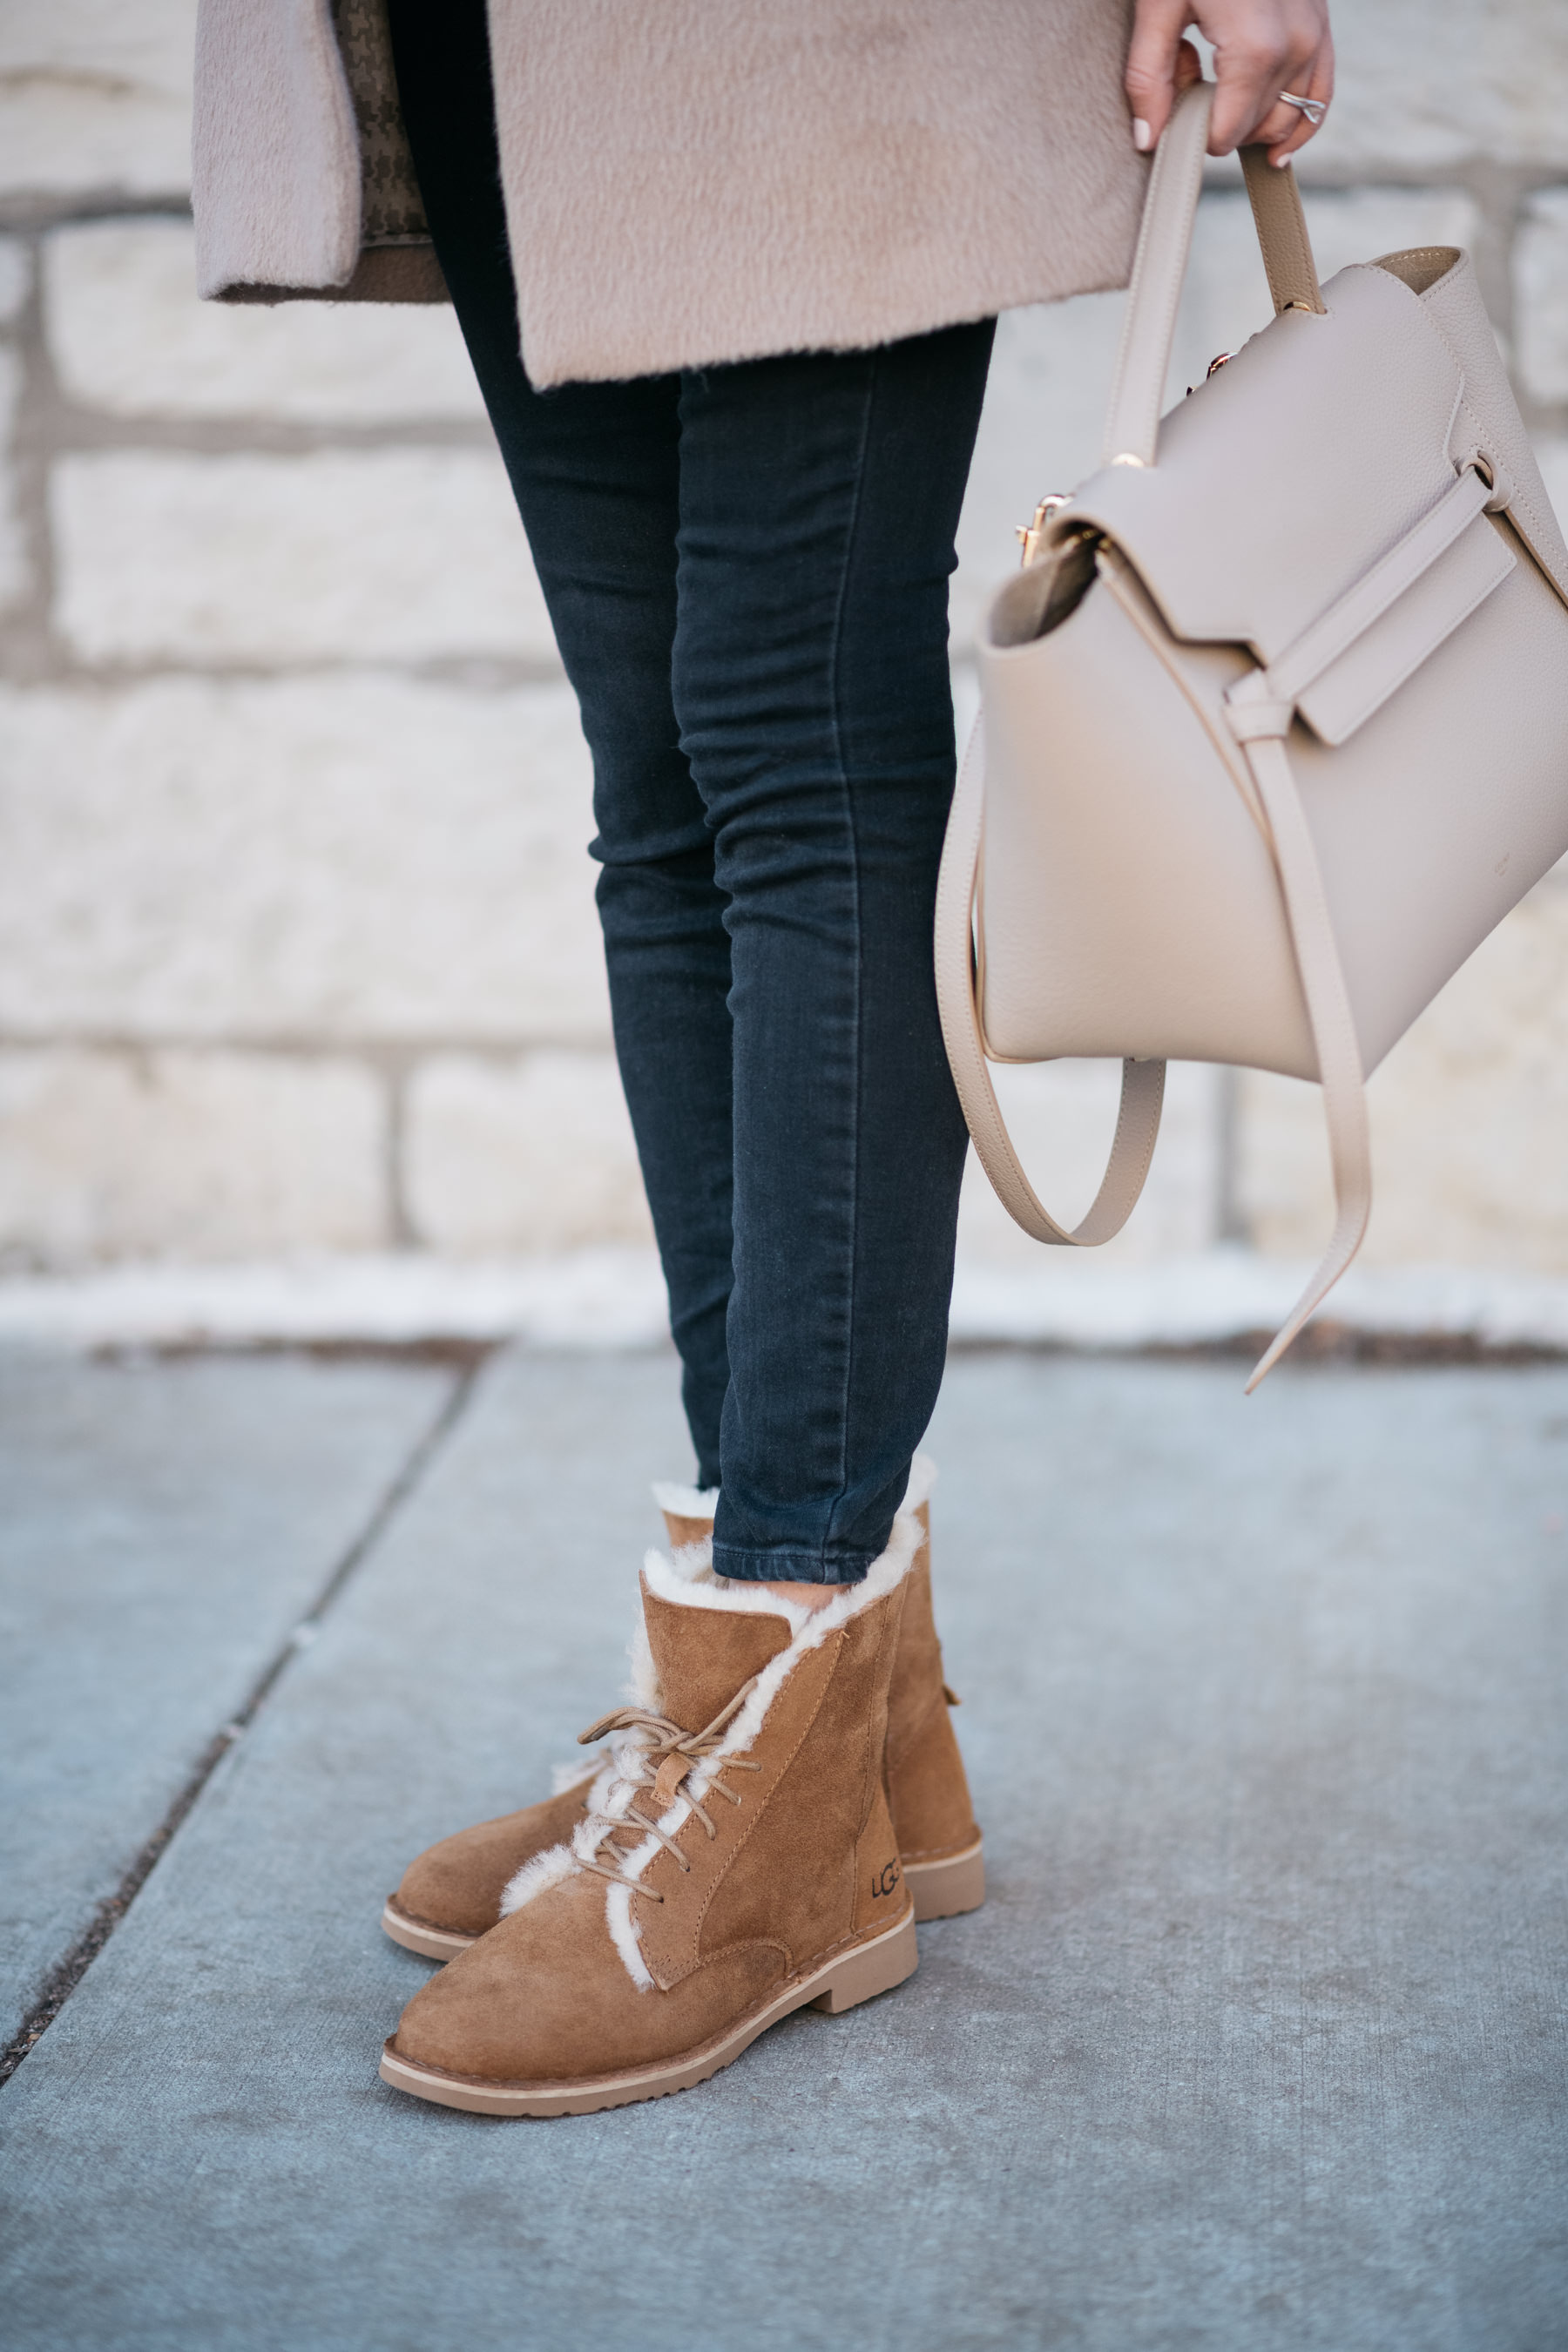 how to style ugg boots for everyday with jeans winter fall quincy